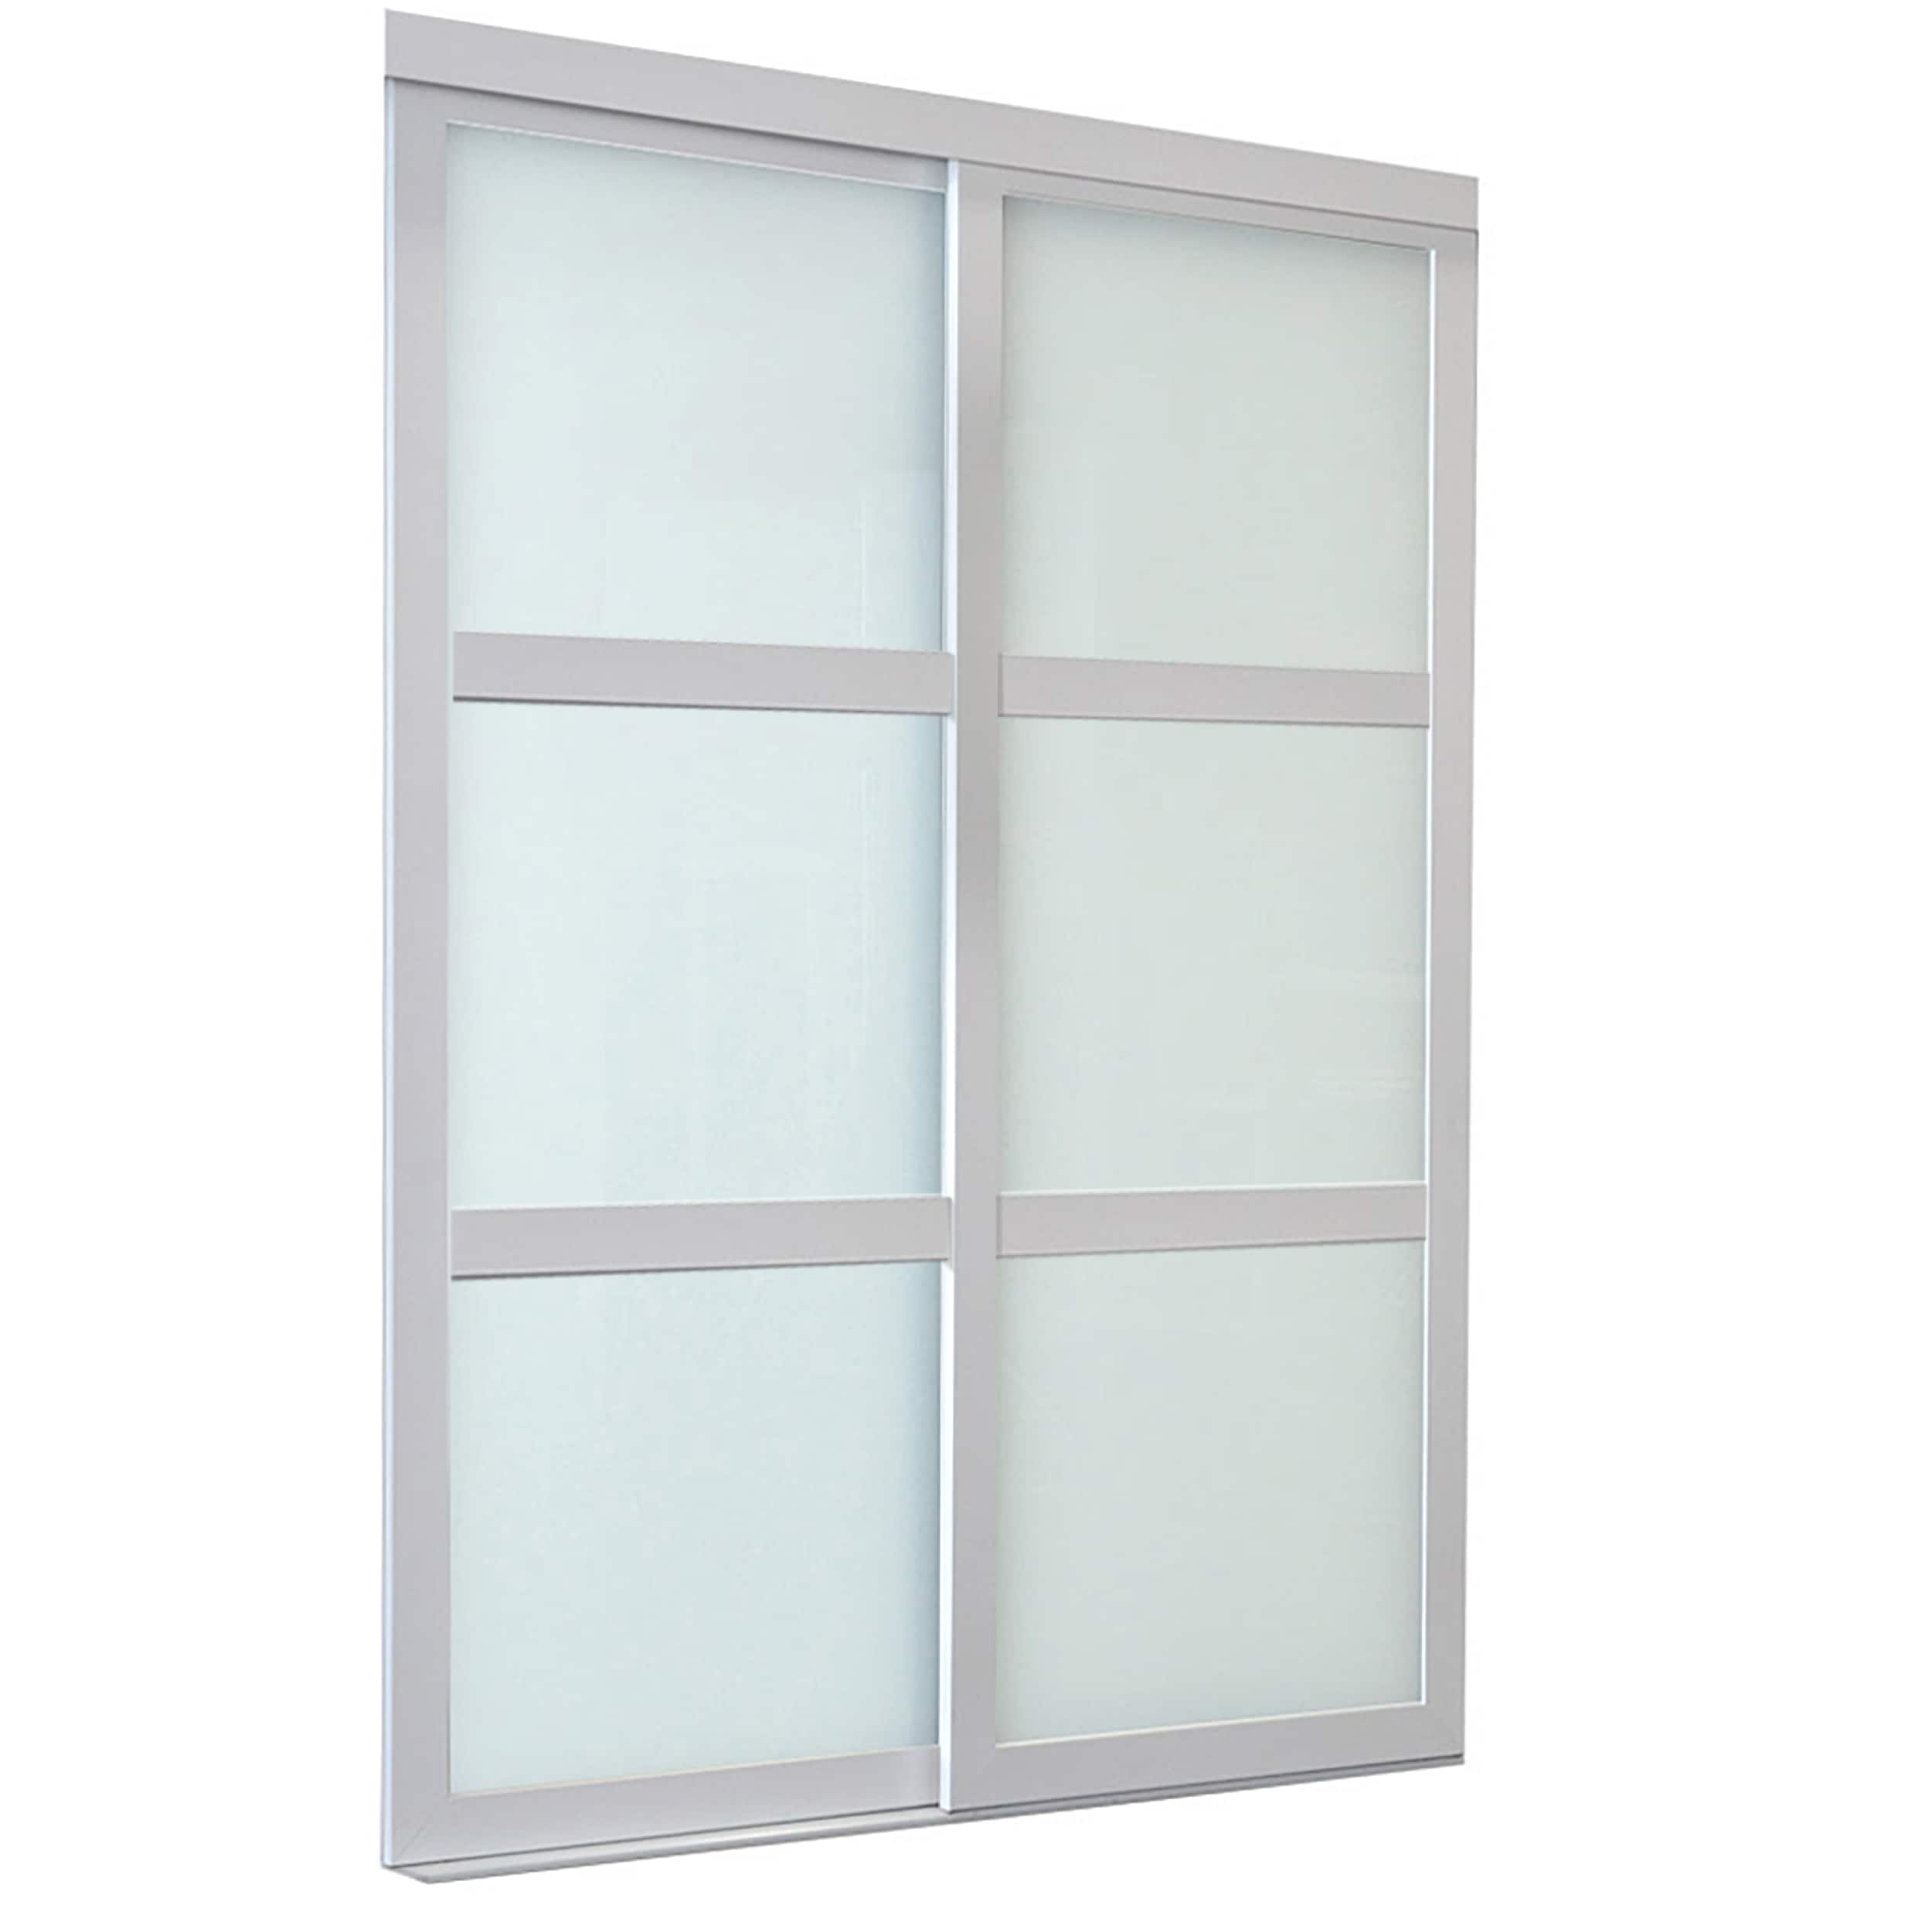 9700 Northwood 48-in x 80-in White FrostMirrored Glass Prefinished Pine Wood Sliding Door Hardware Included | - RELIABILT 7004068WHP2WL2DS